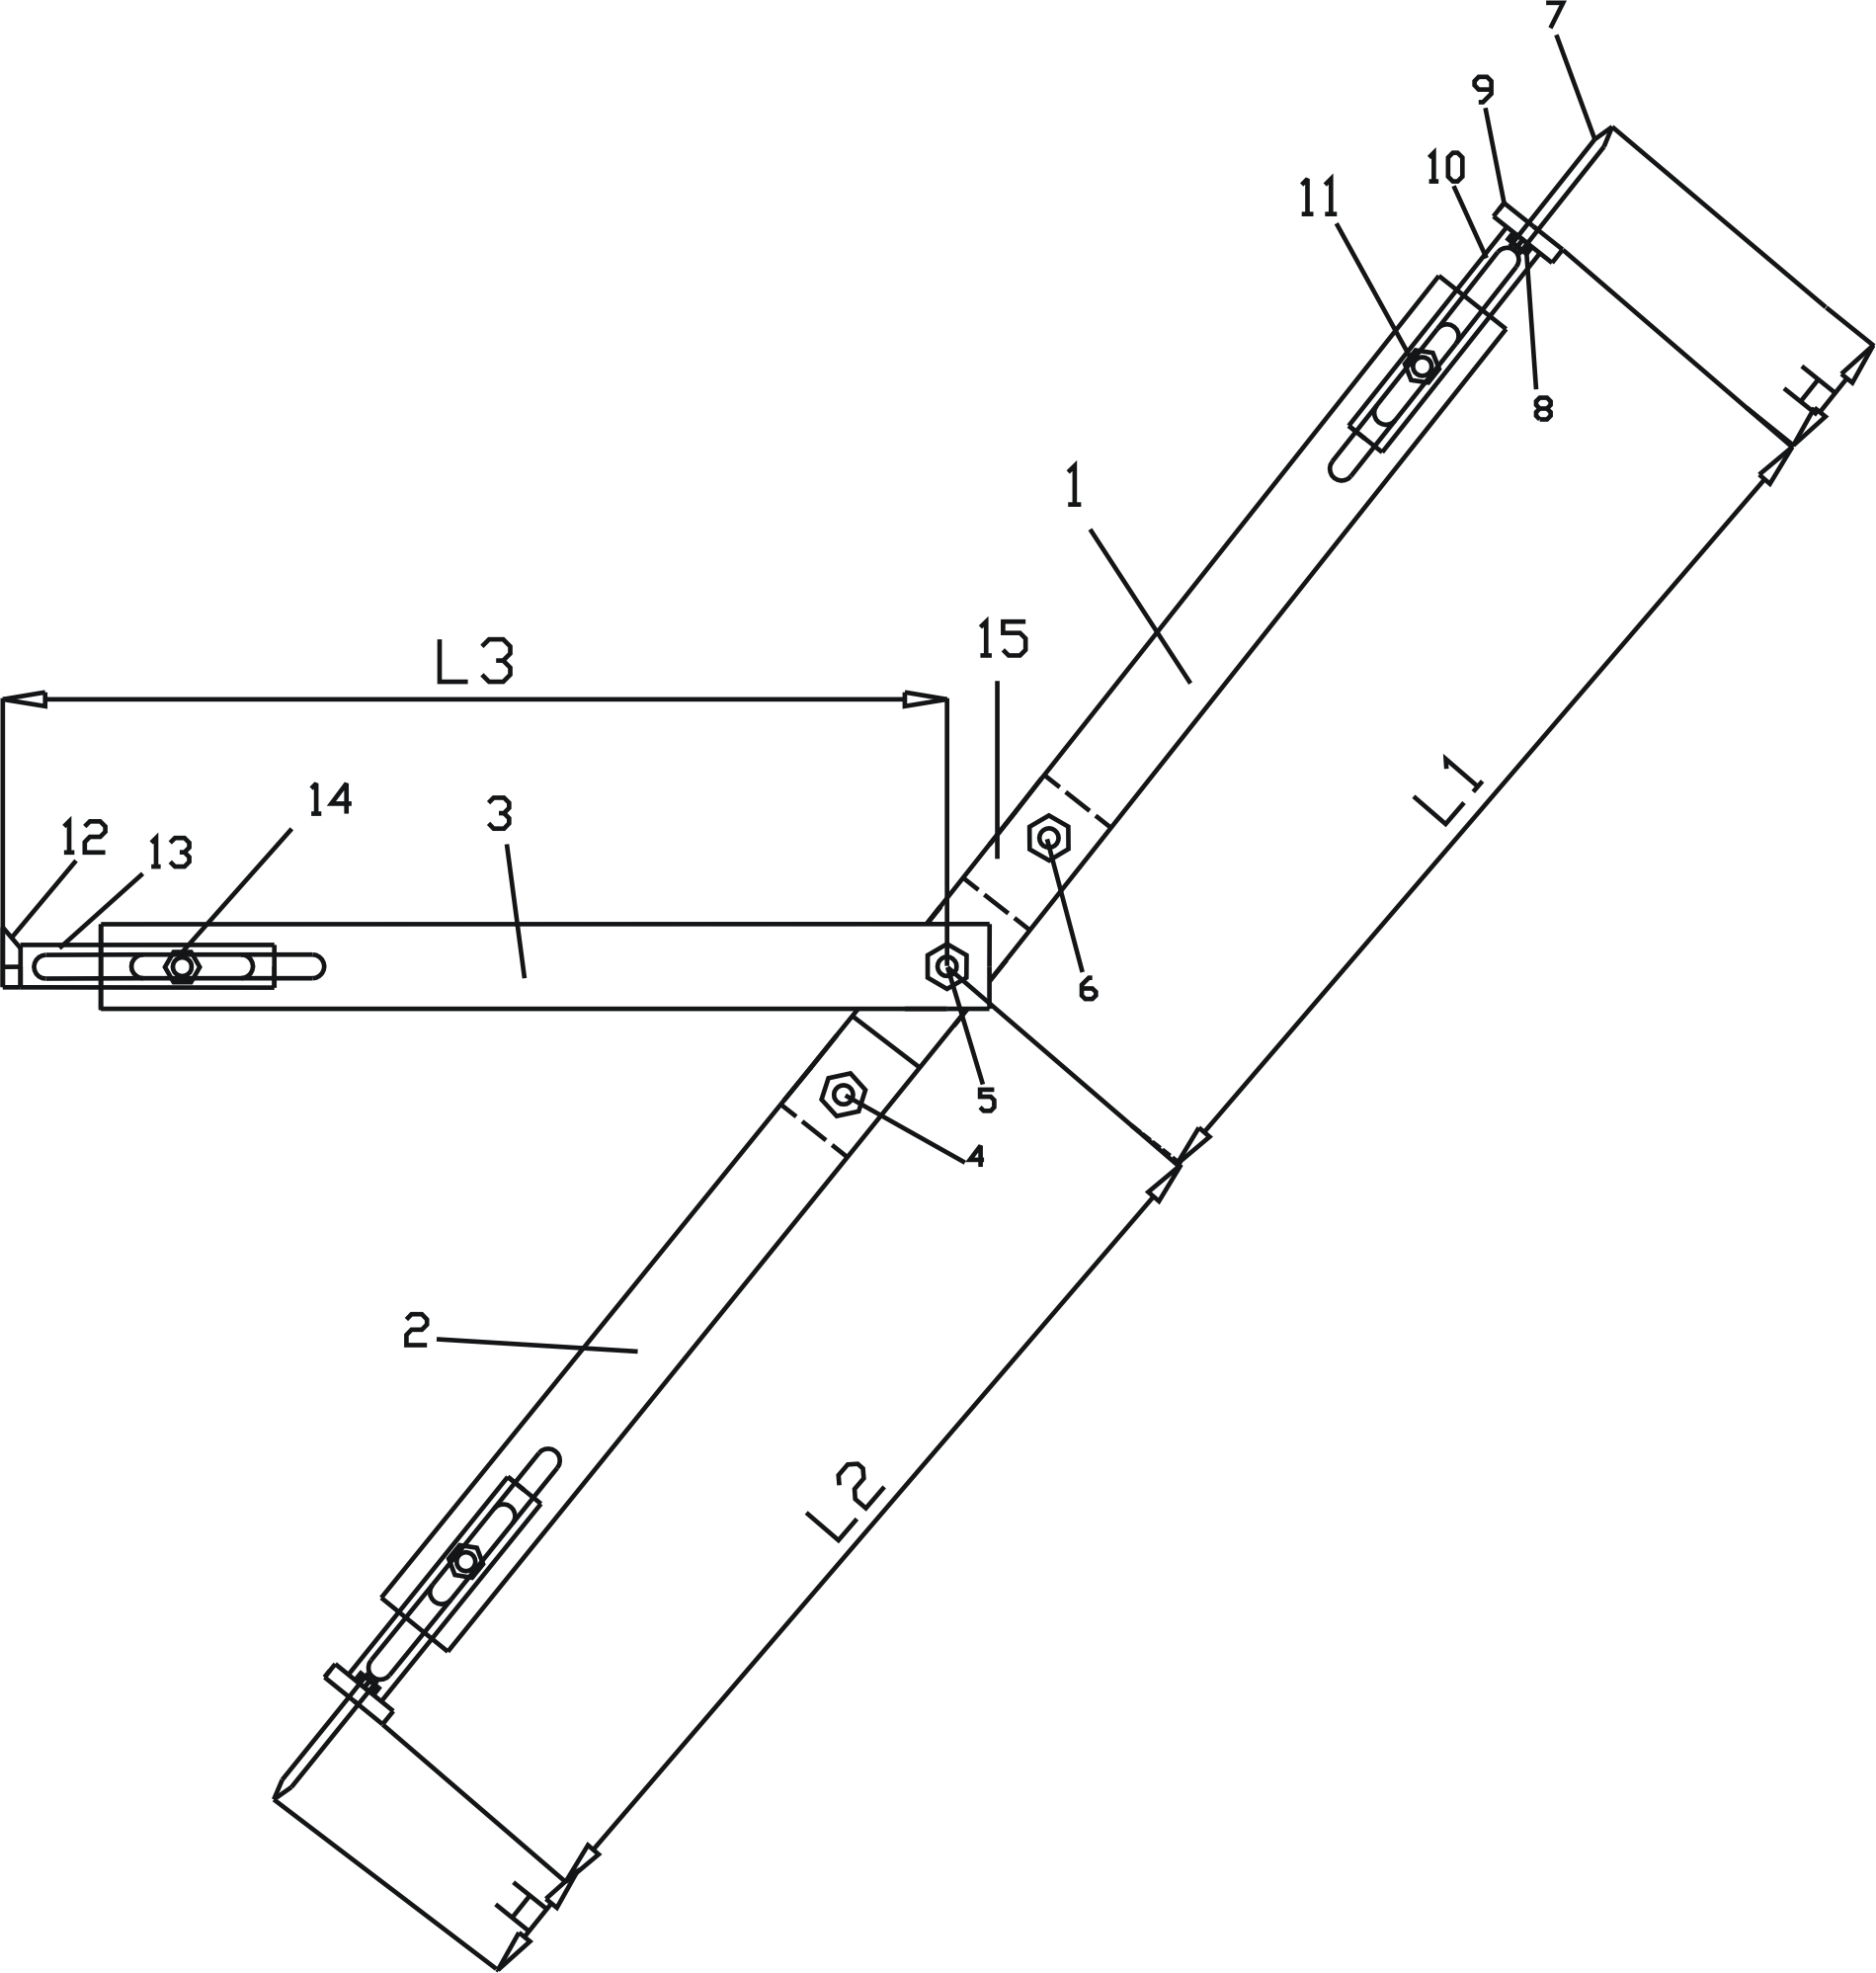 Detection control method for thickness of sprayed material on inner wall of pipeline